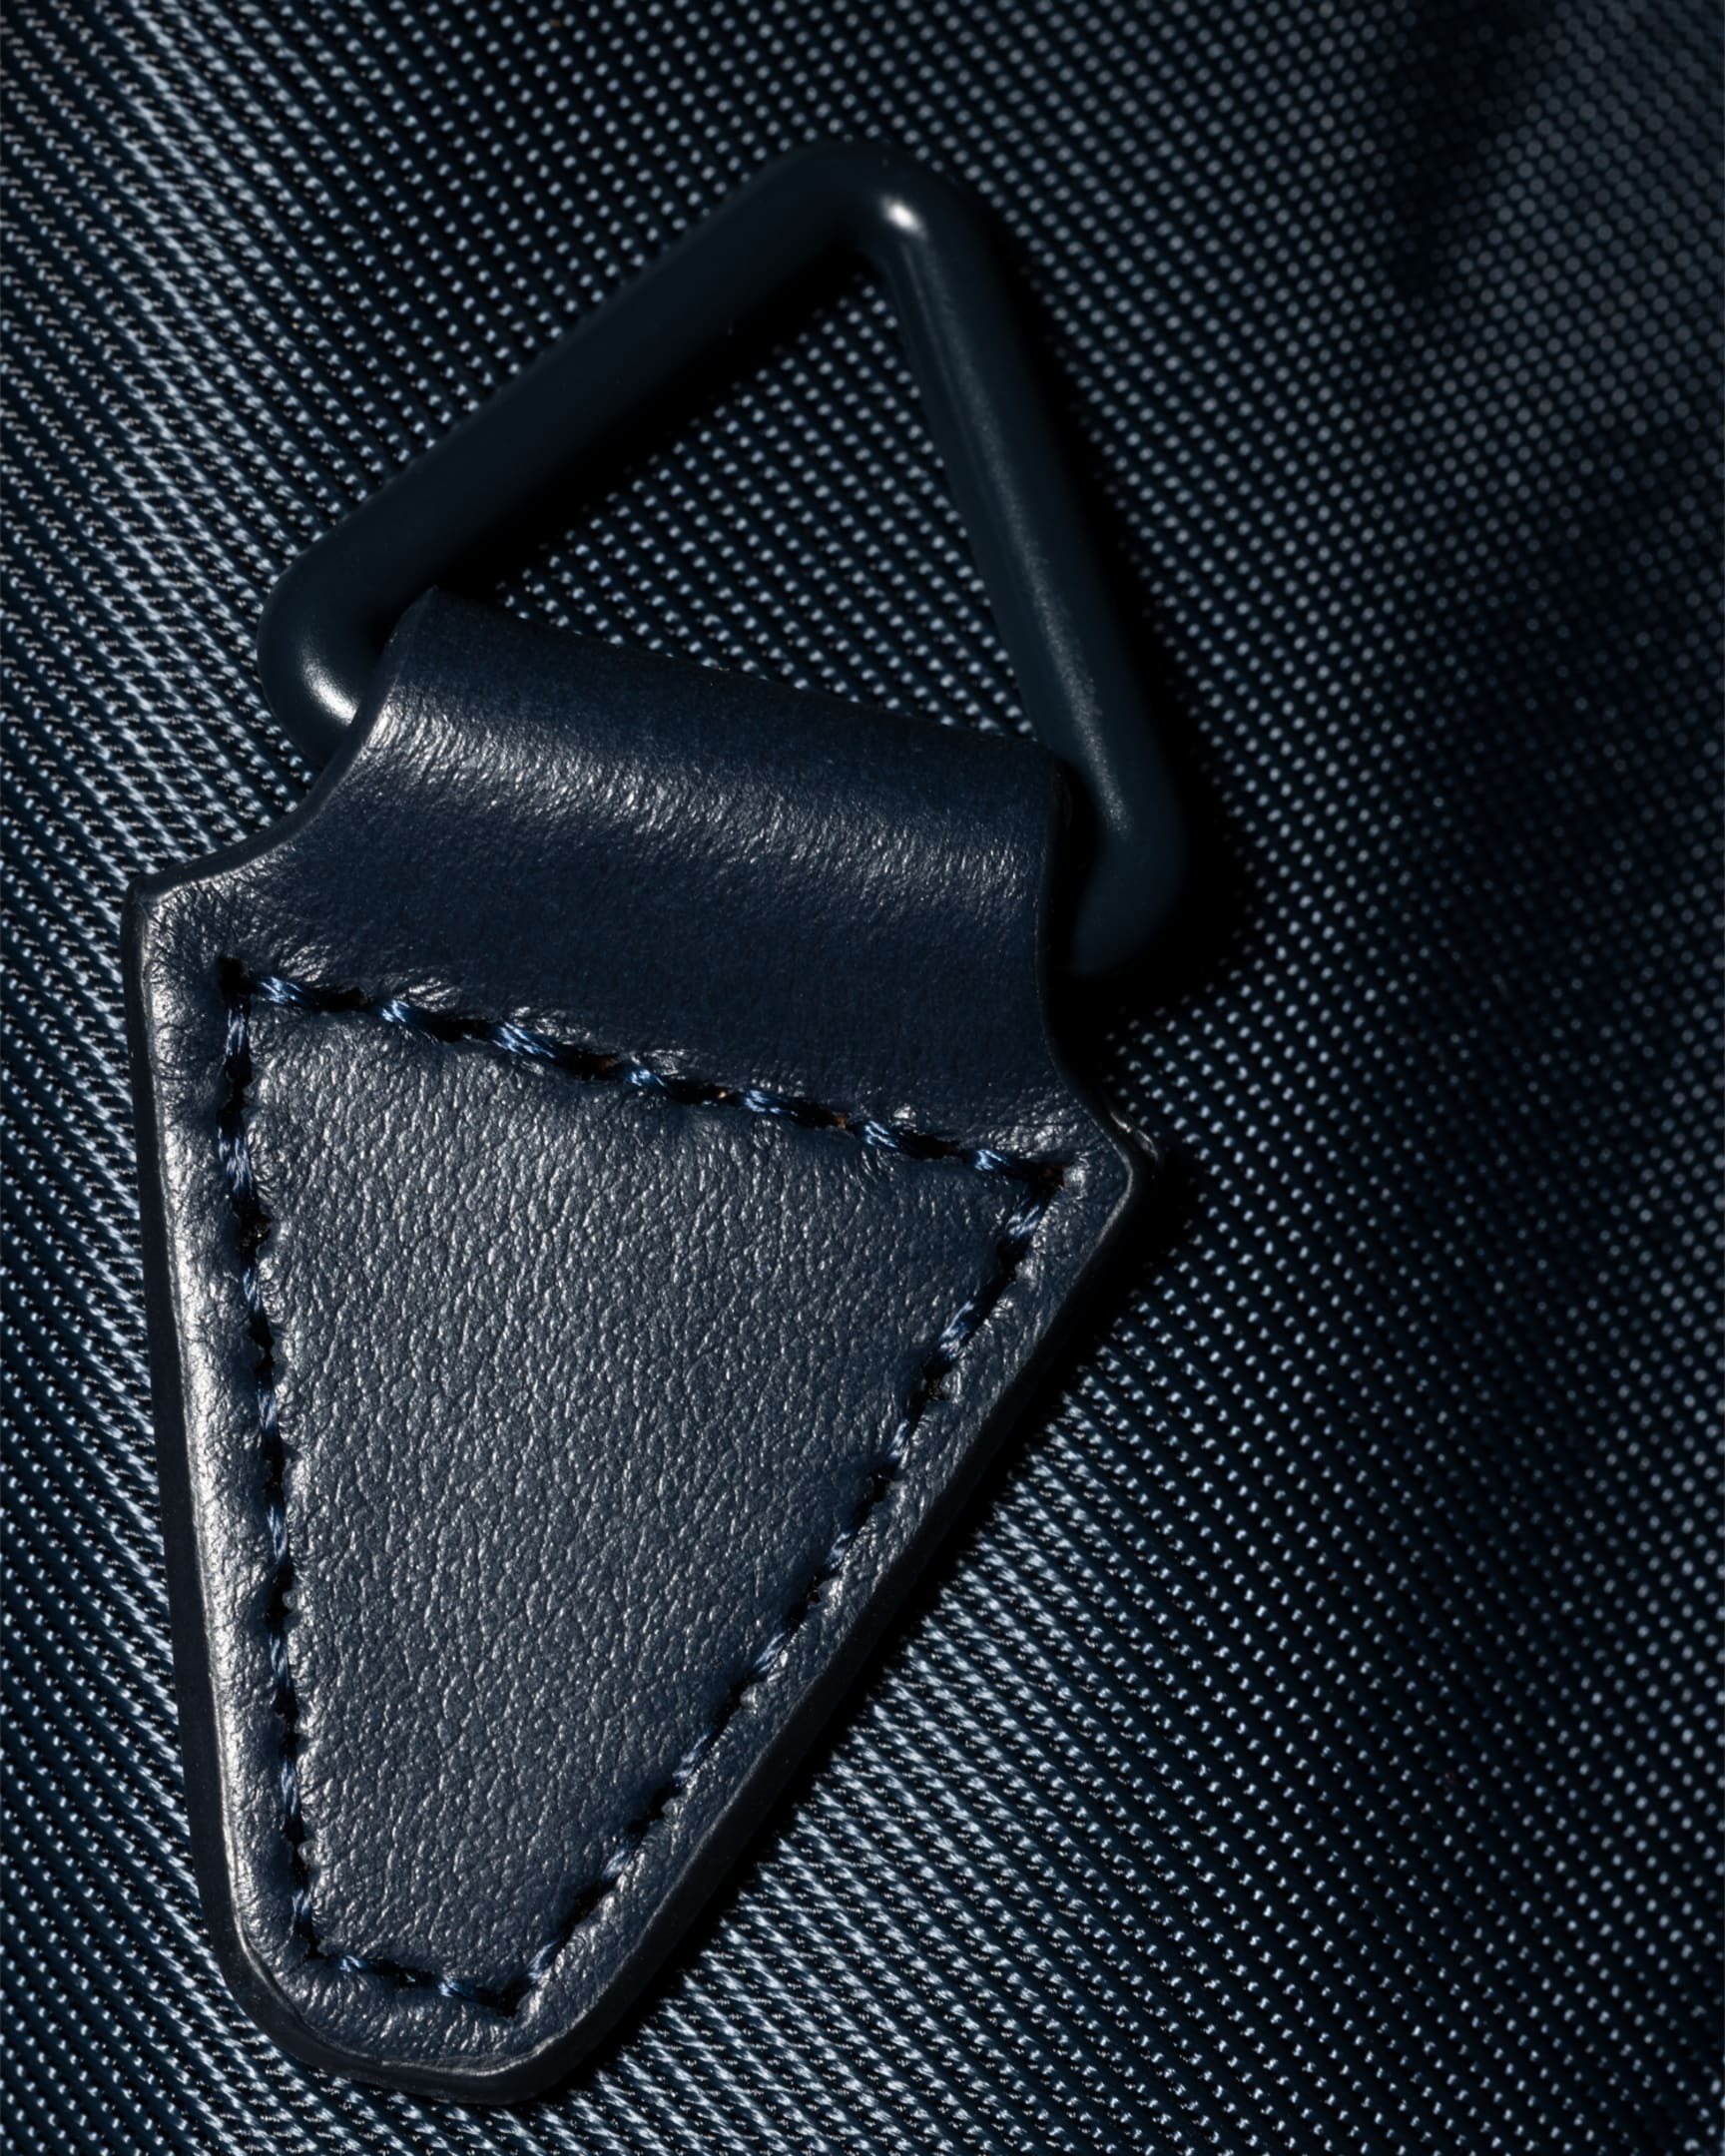 Detail View - Navy 'Sports Stripe' Nylon Backpack Paul Smith